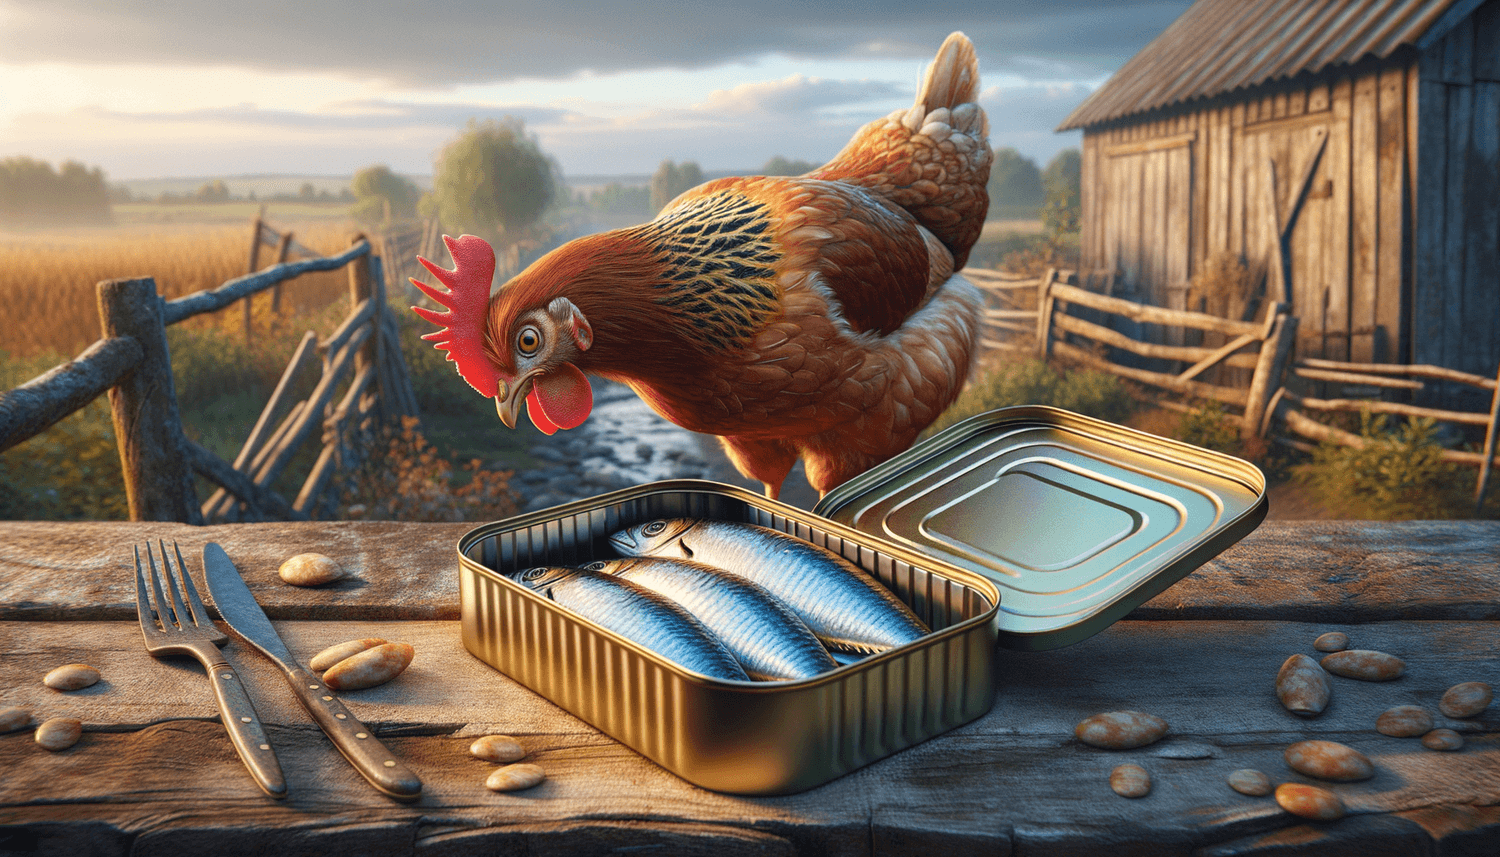 Can Chickens Eat Sardines?